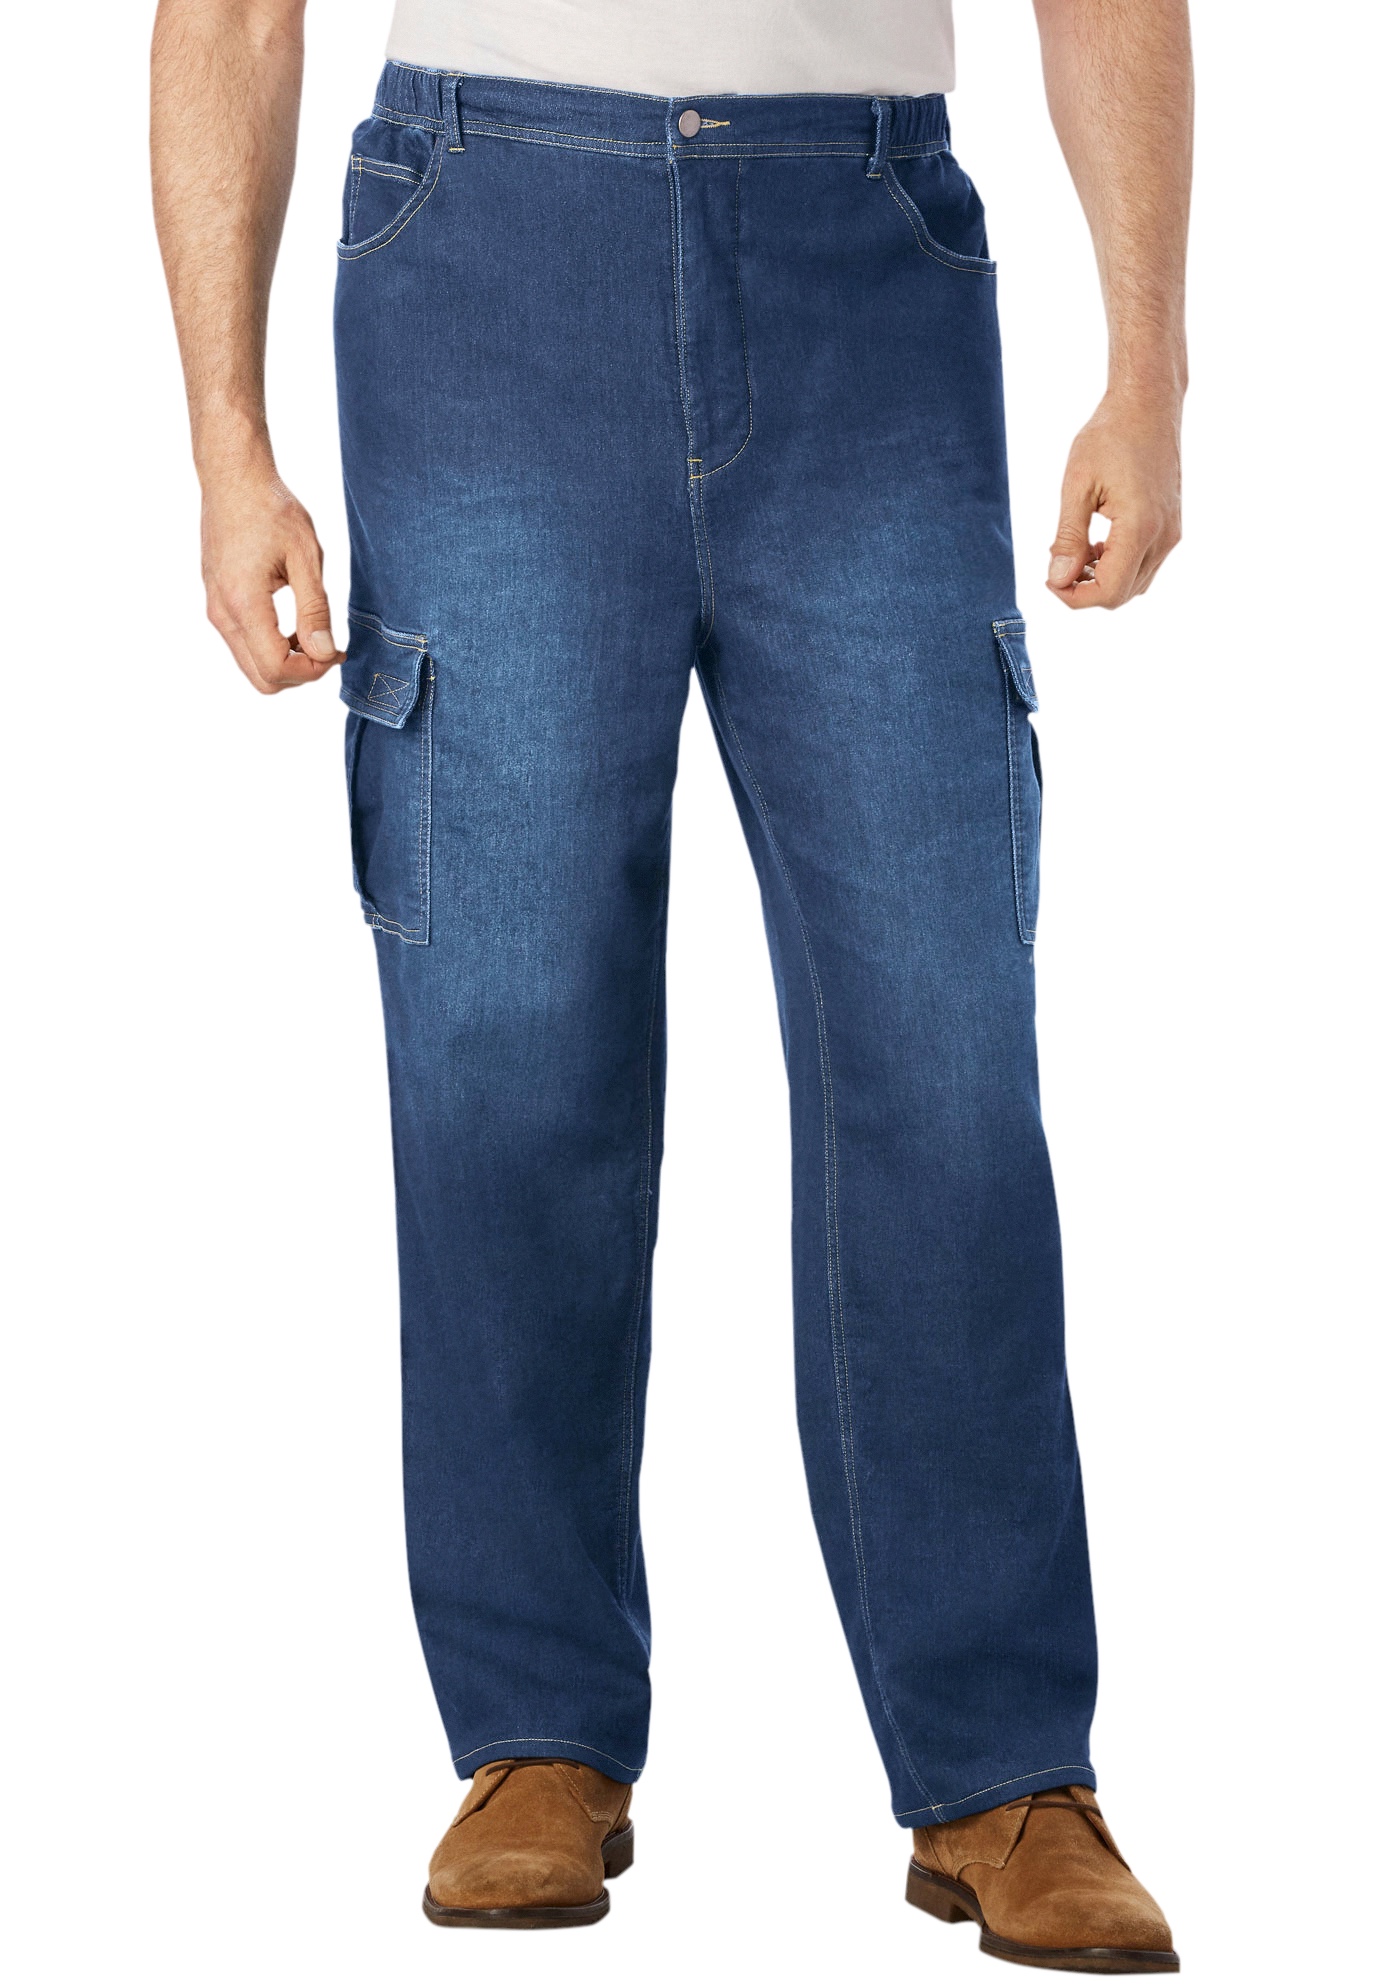 Kingsize Men's Big & Tall Relaxed Fit Cargo Denim Look Sweatpants Jeans - image 1 of 6